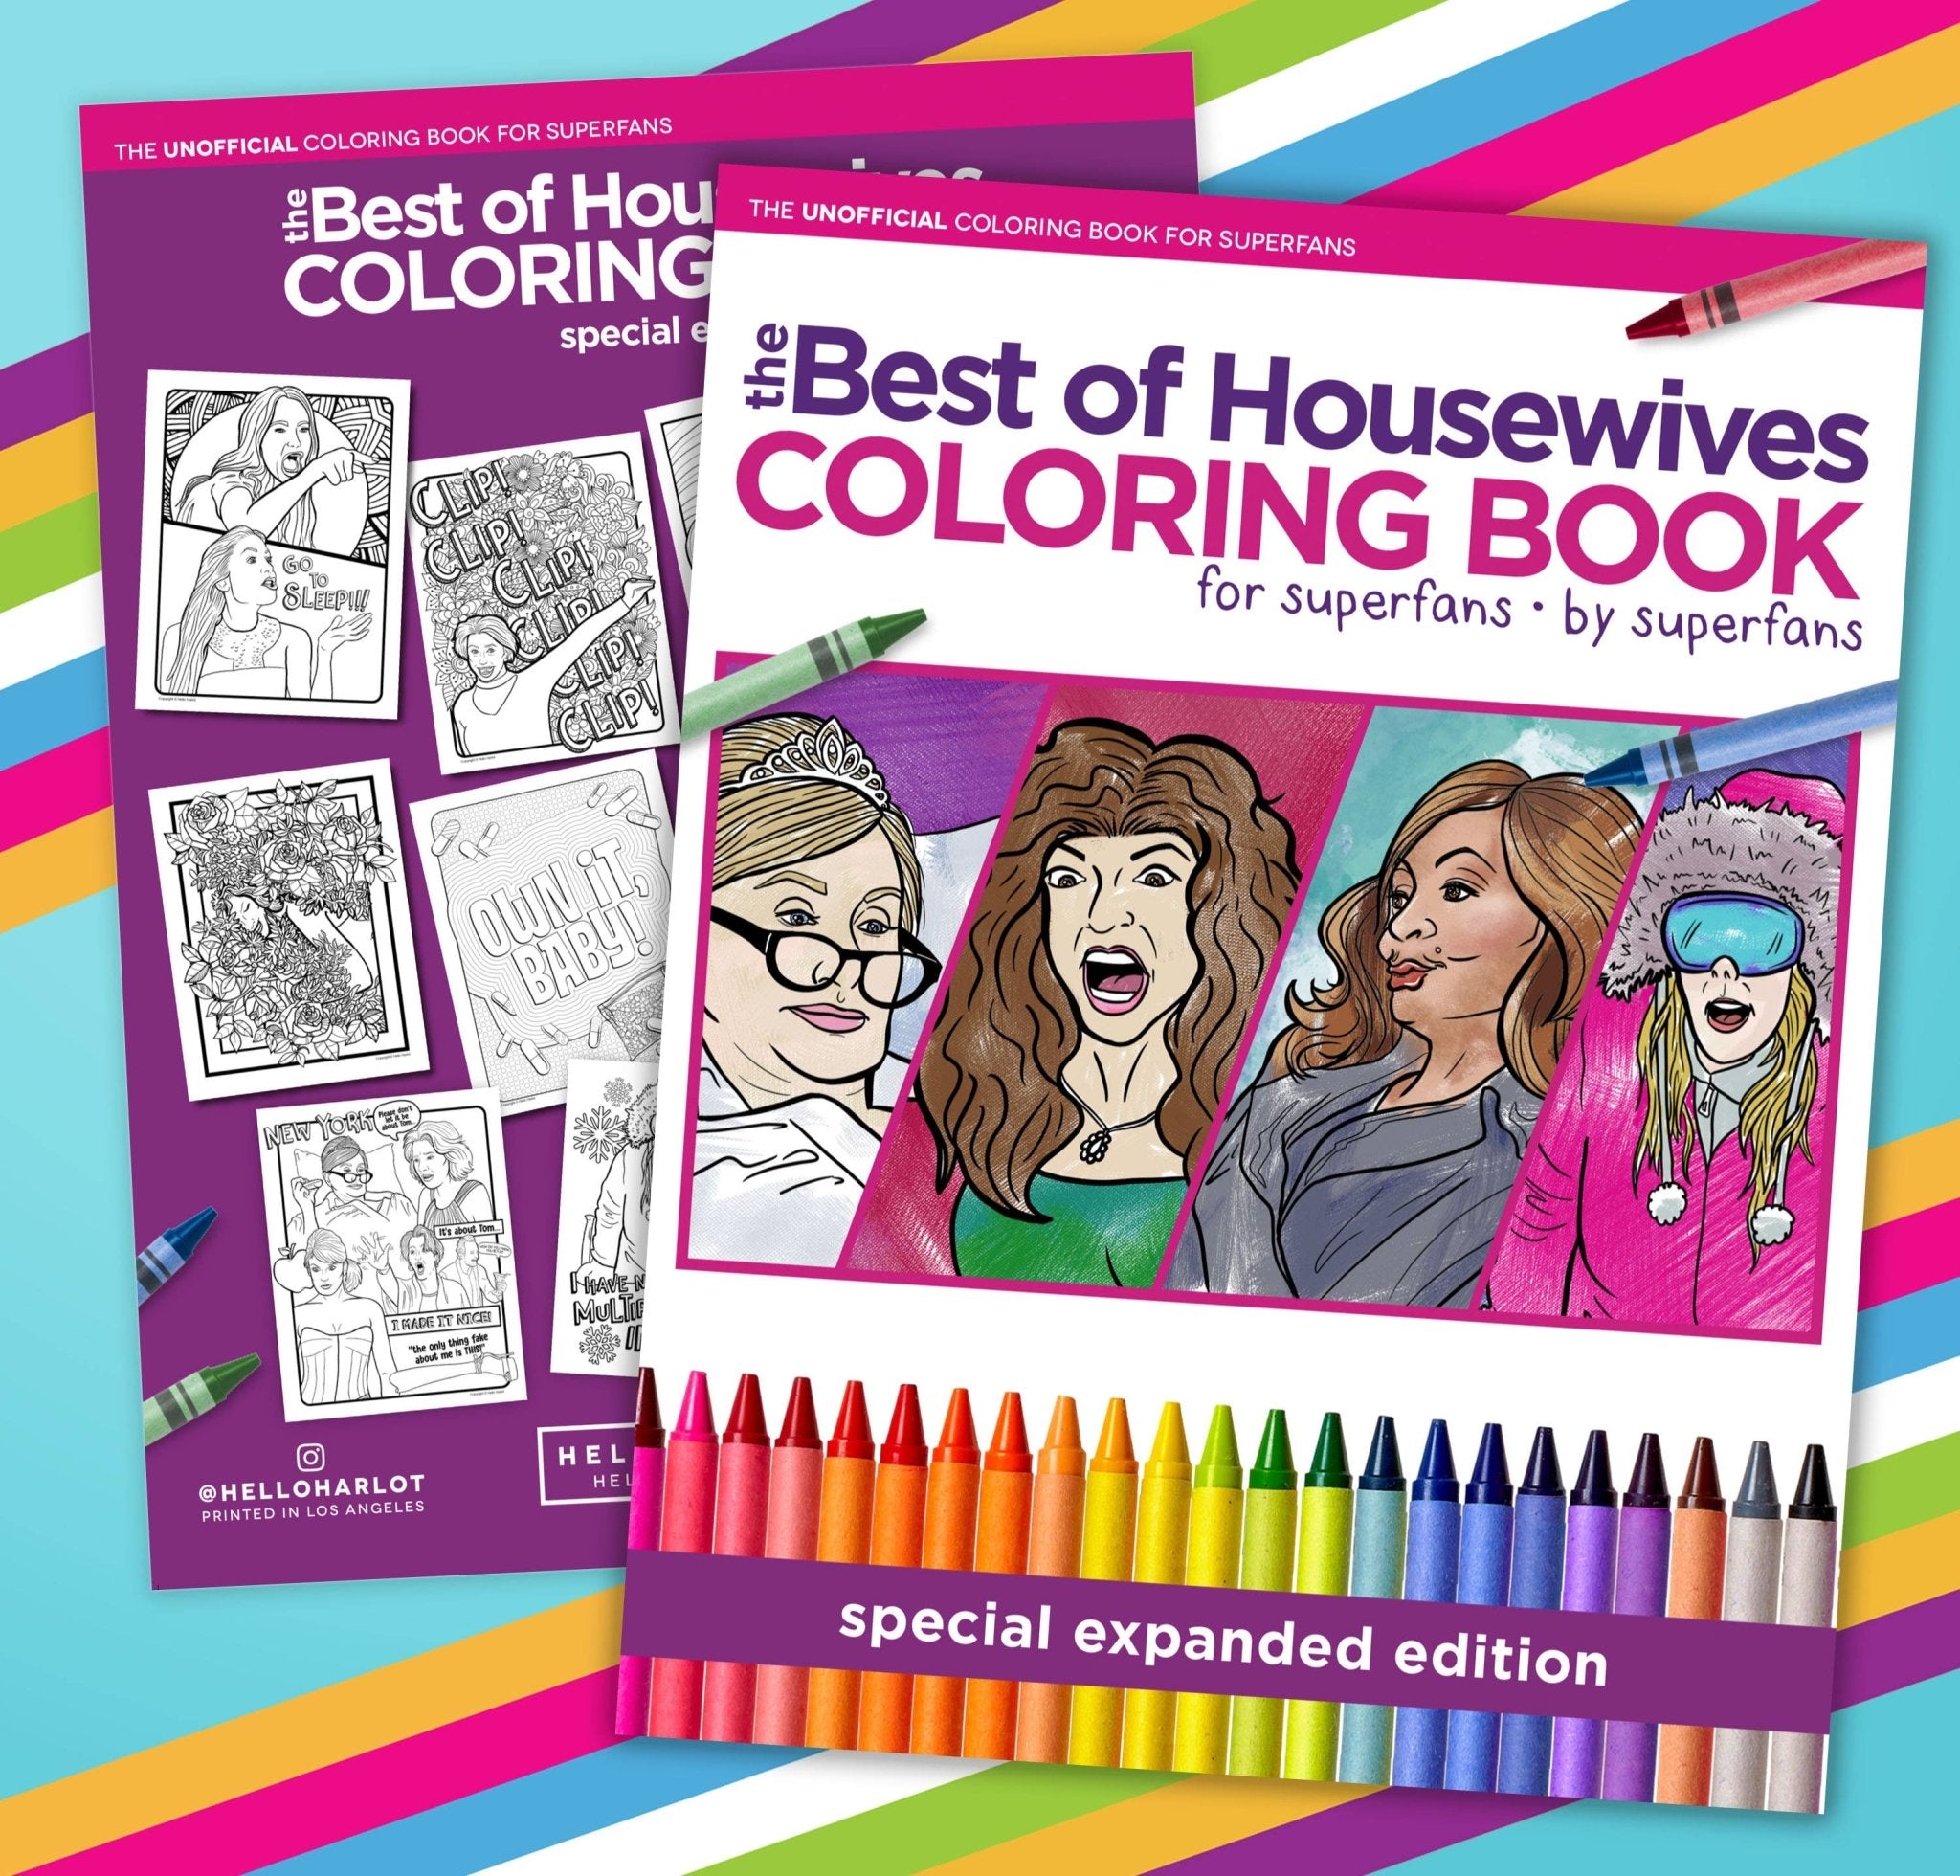 Best of Housewives Coloring Book Hello Harlot Floret + Foliage